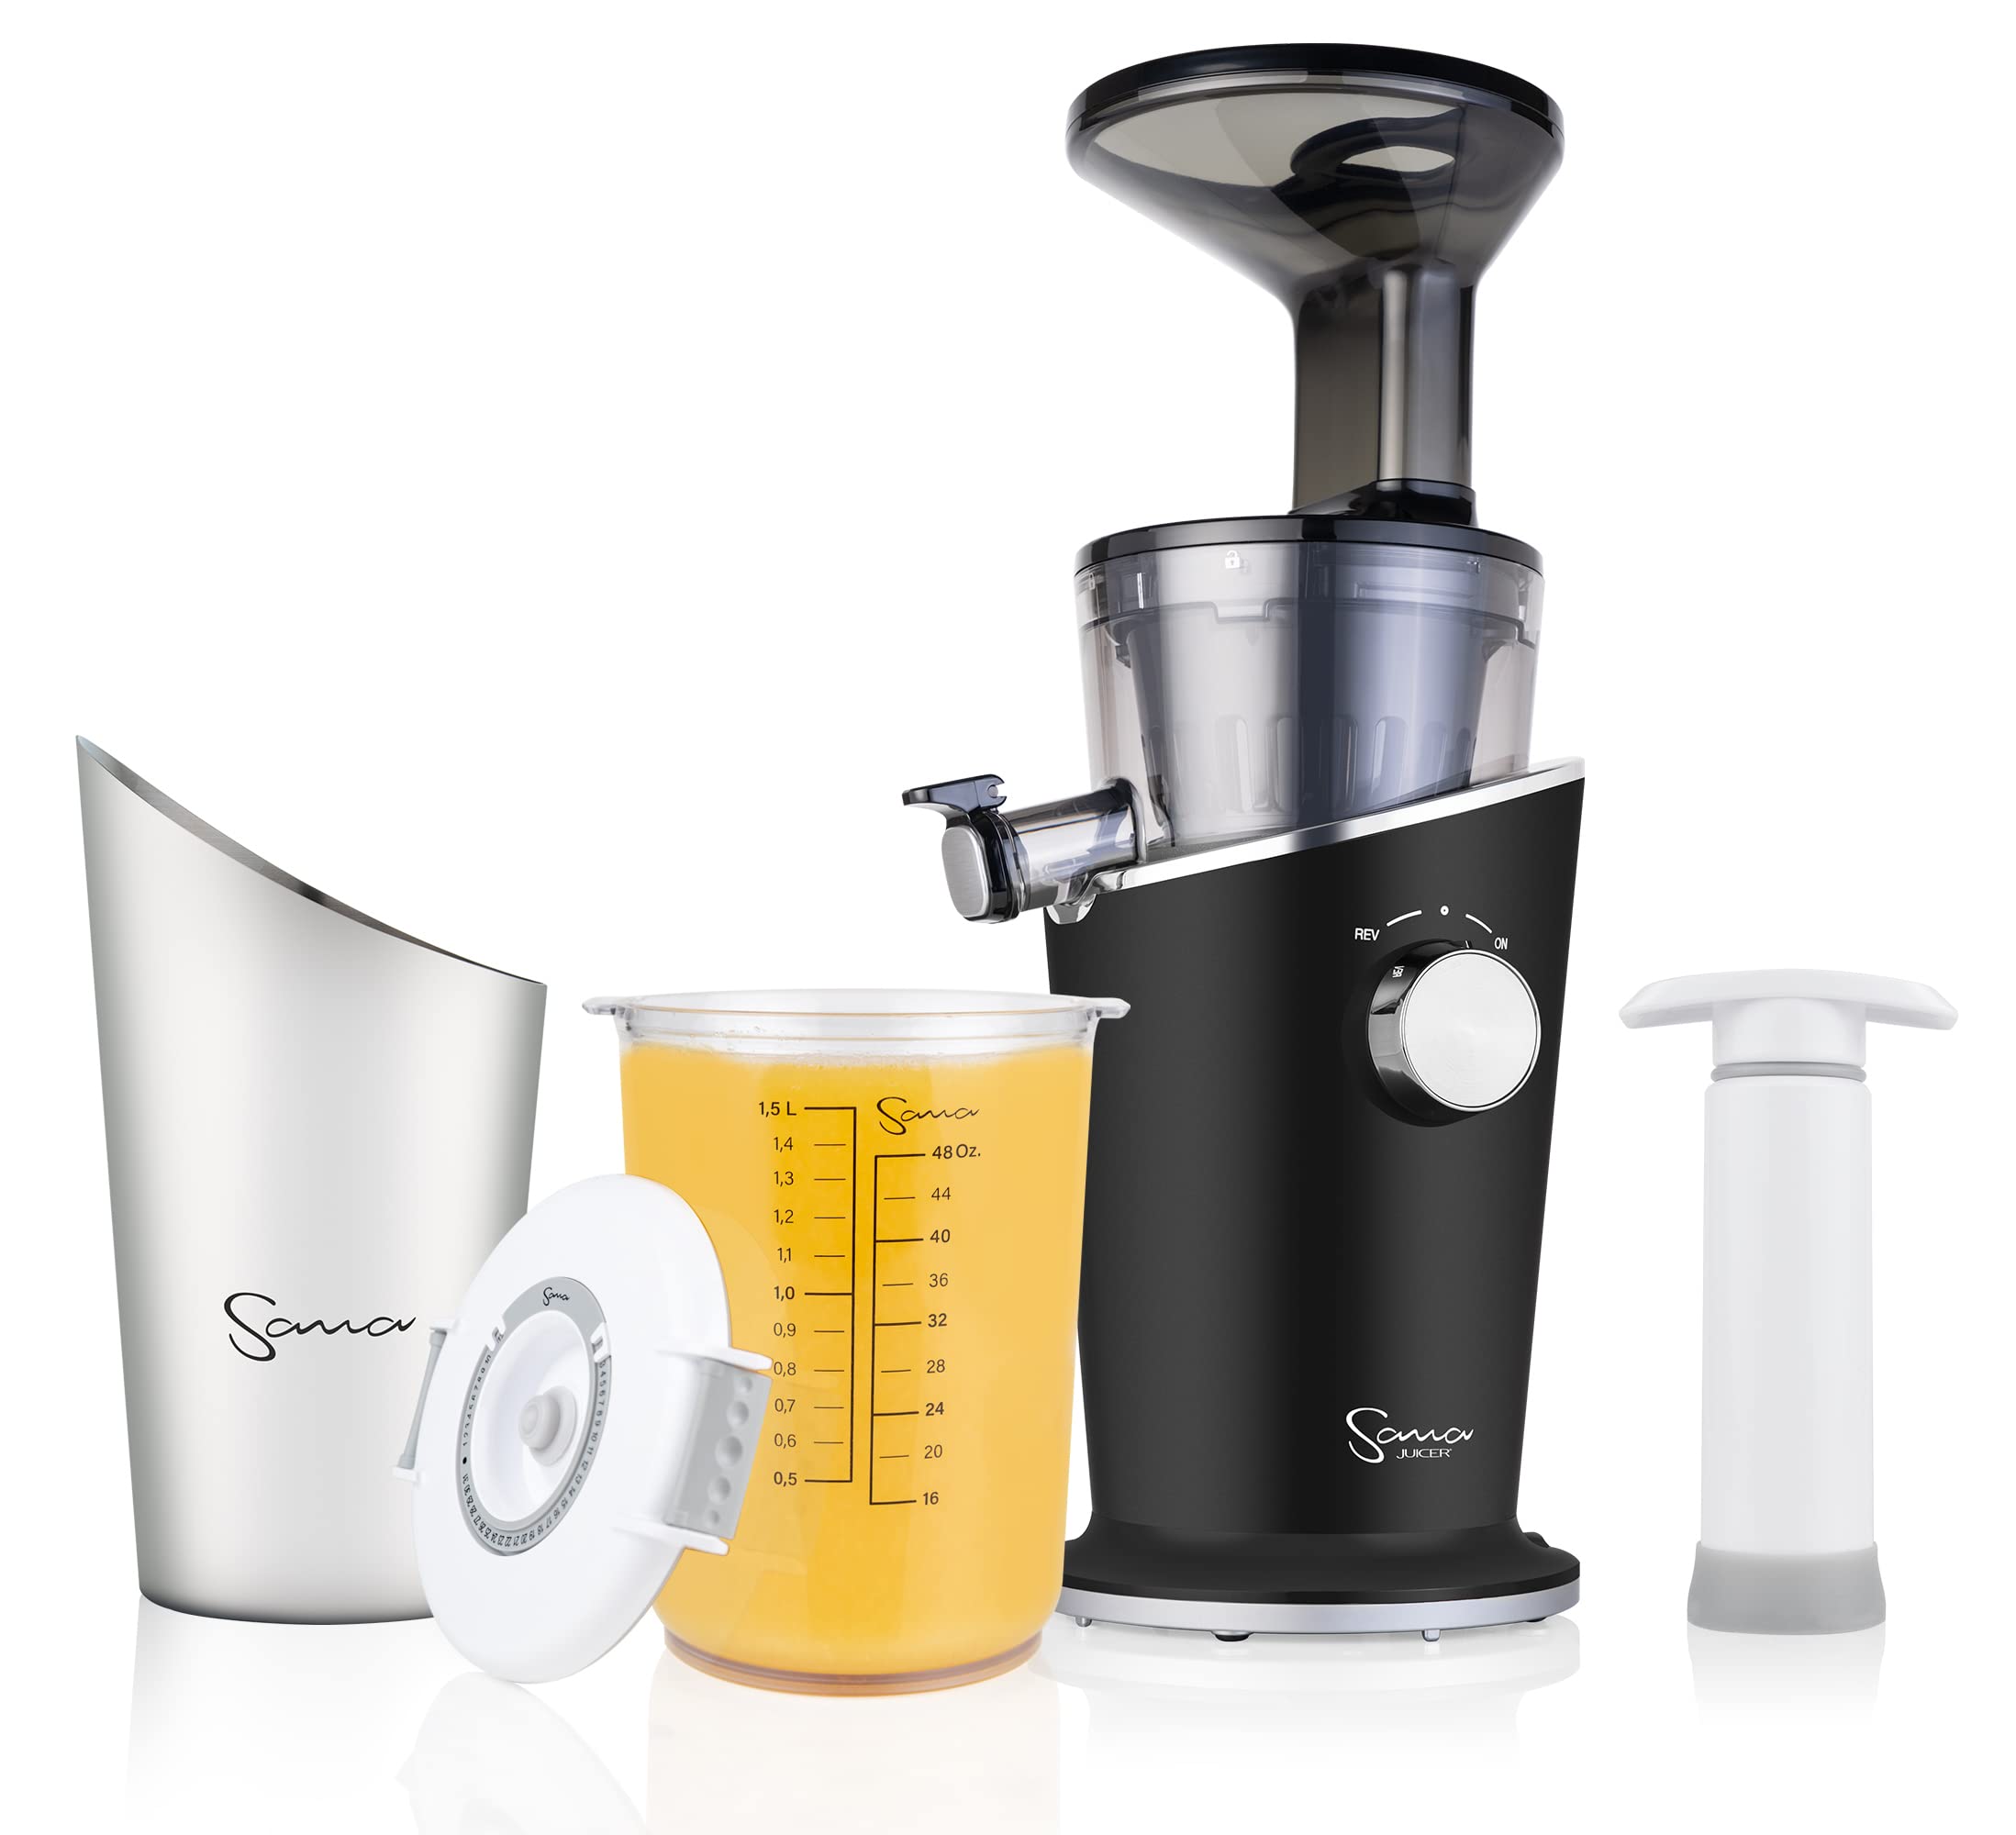 Looking to Buy The Best Slow Juicer in 2023. Discover Why The Sana 727 Supreme Juicer Stands Out From The Rest